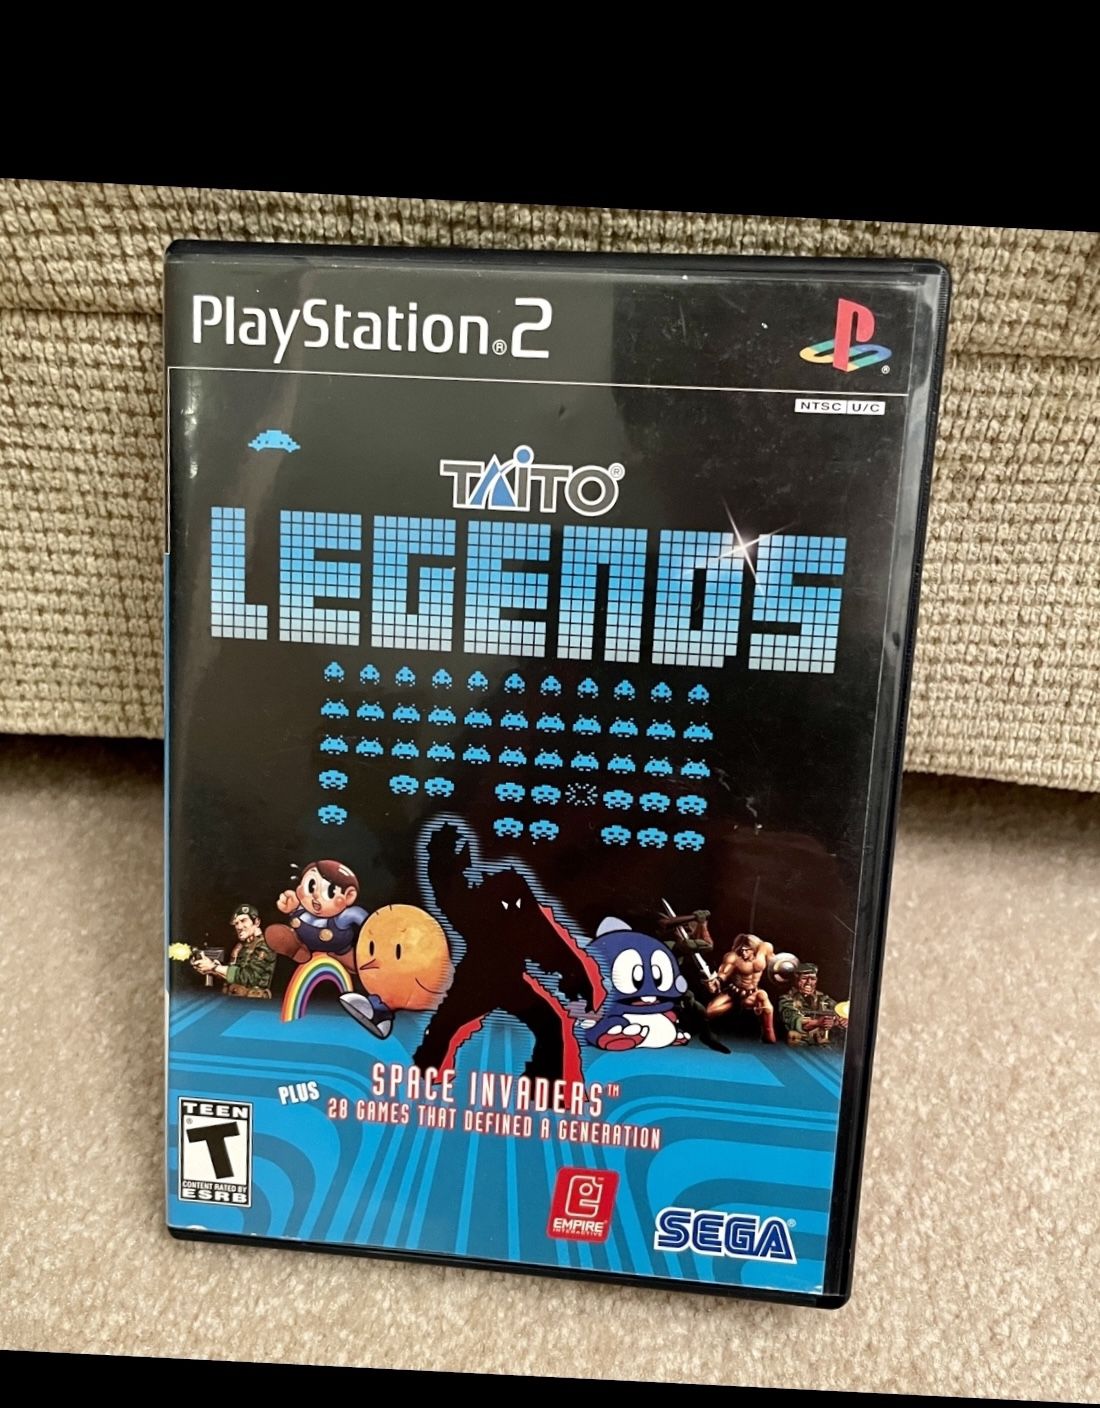 Taito Legends 1 Playstation 2 Ps2 Video Game For System Console Complete Retro Gaming Disc Case Manual Classic